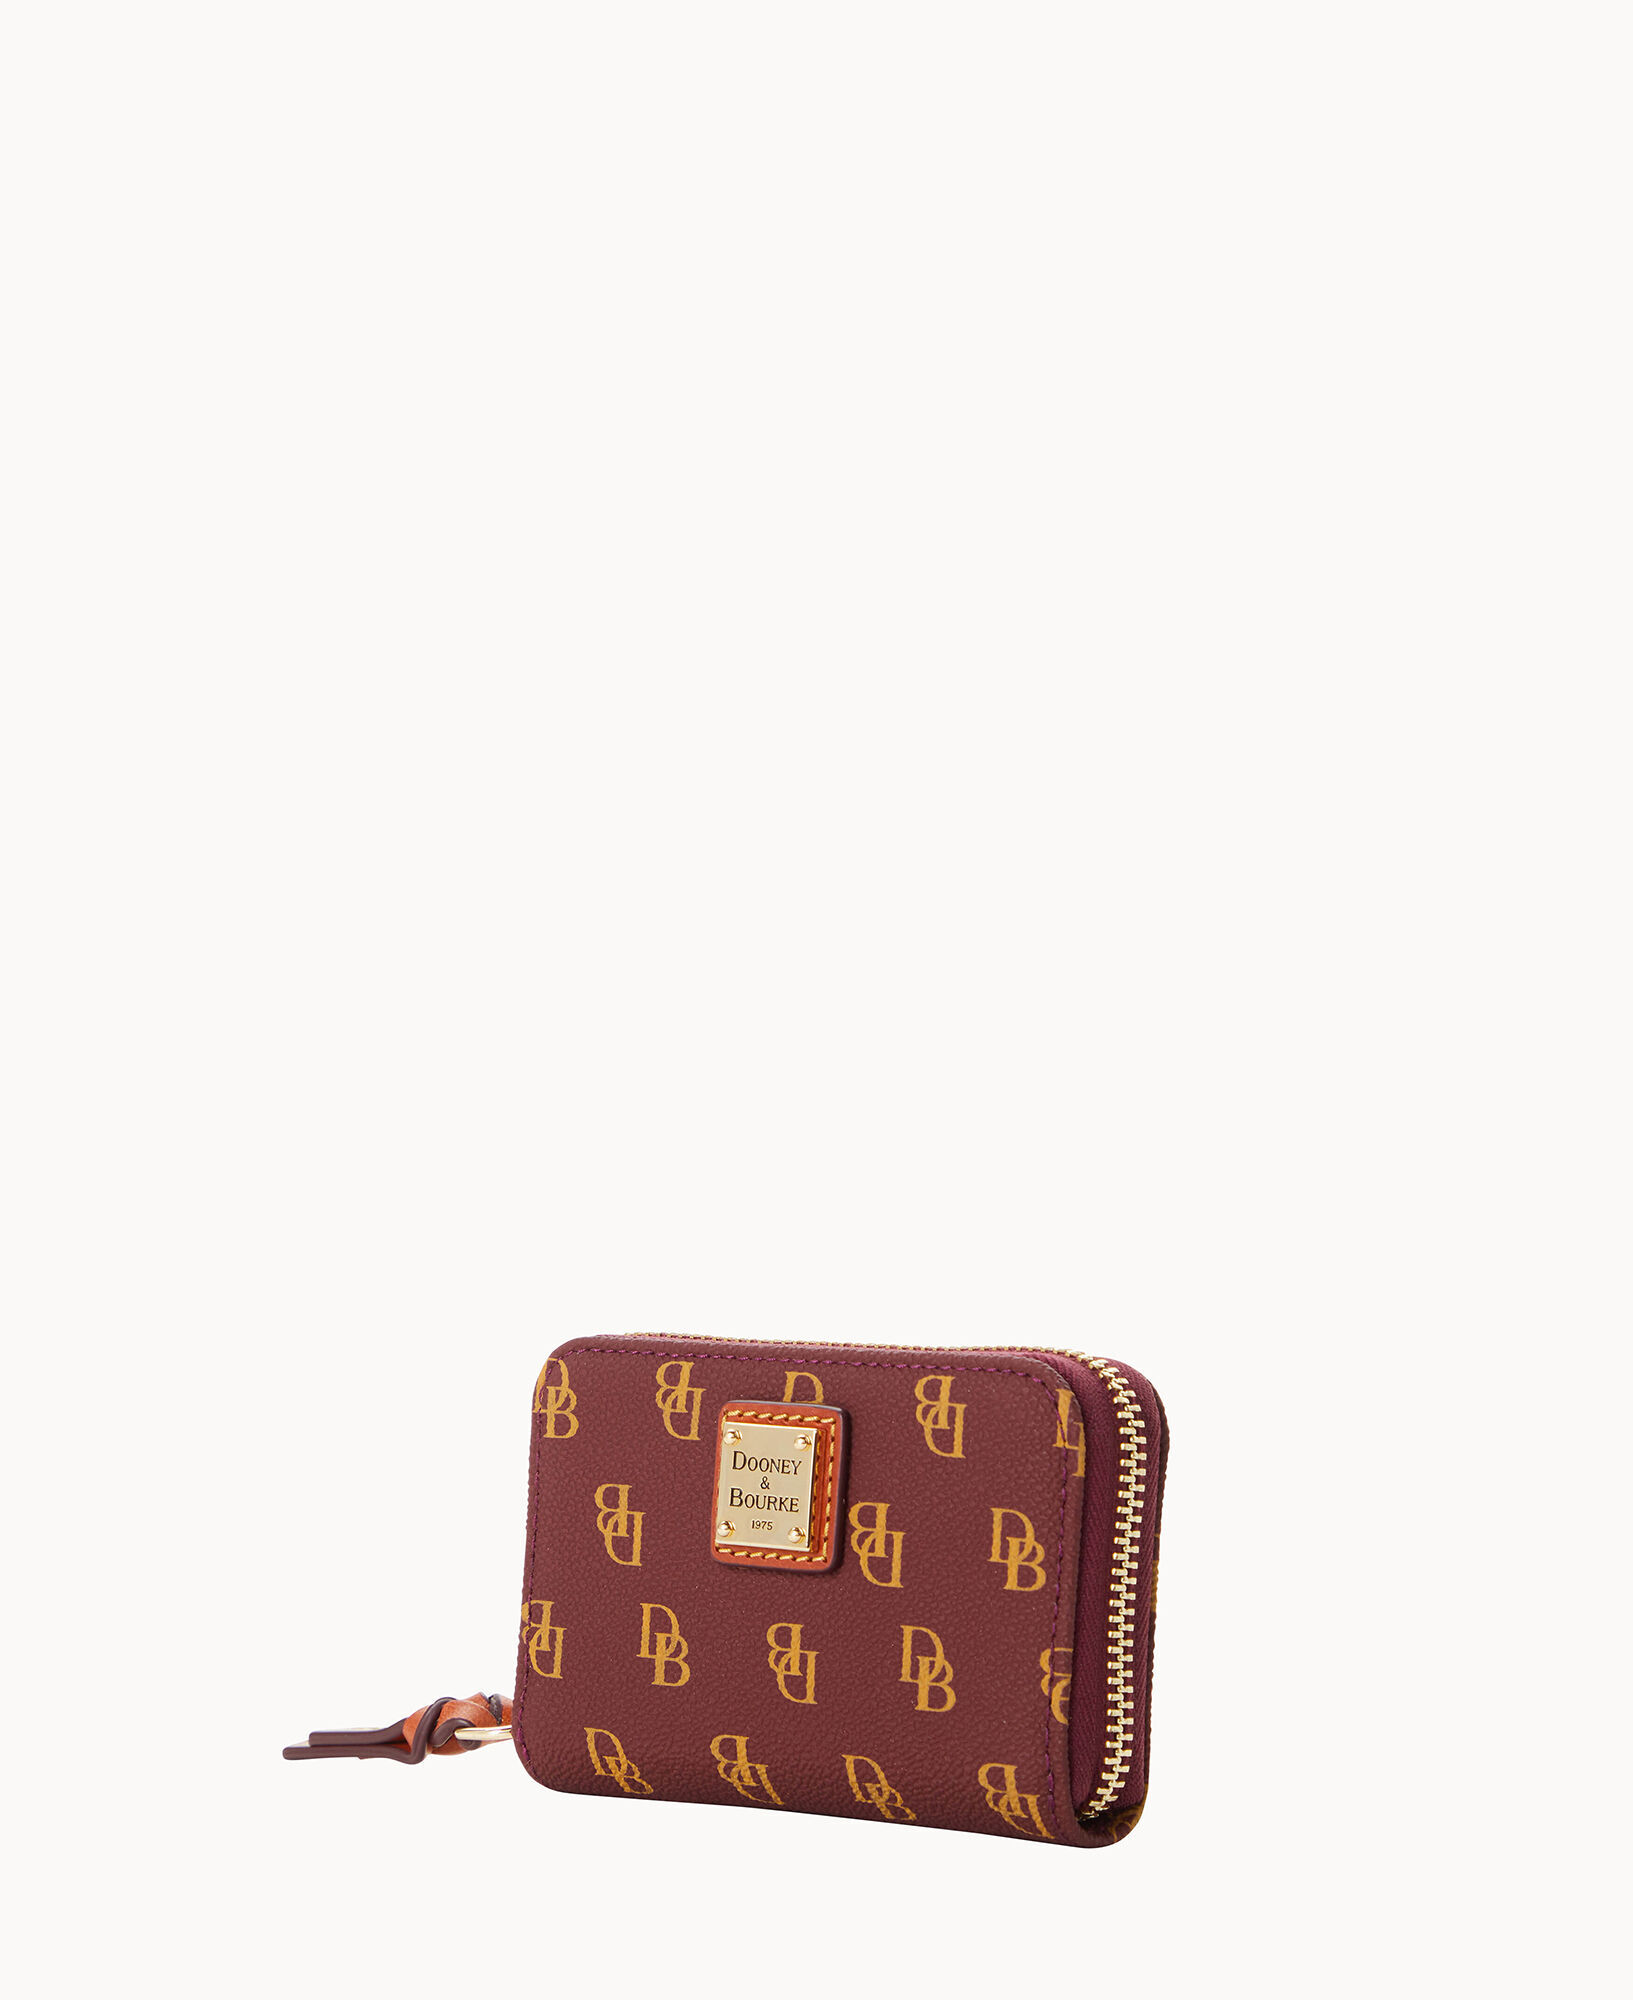 Celeste Wallet Monogram Canvas - Wallets and Small Leather Goods